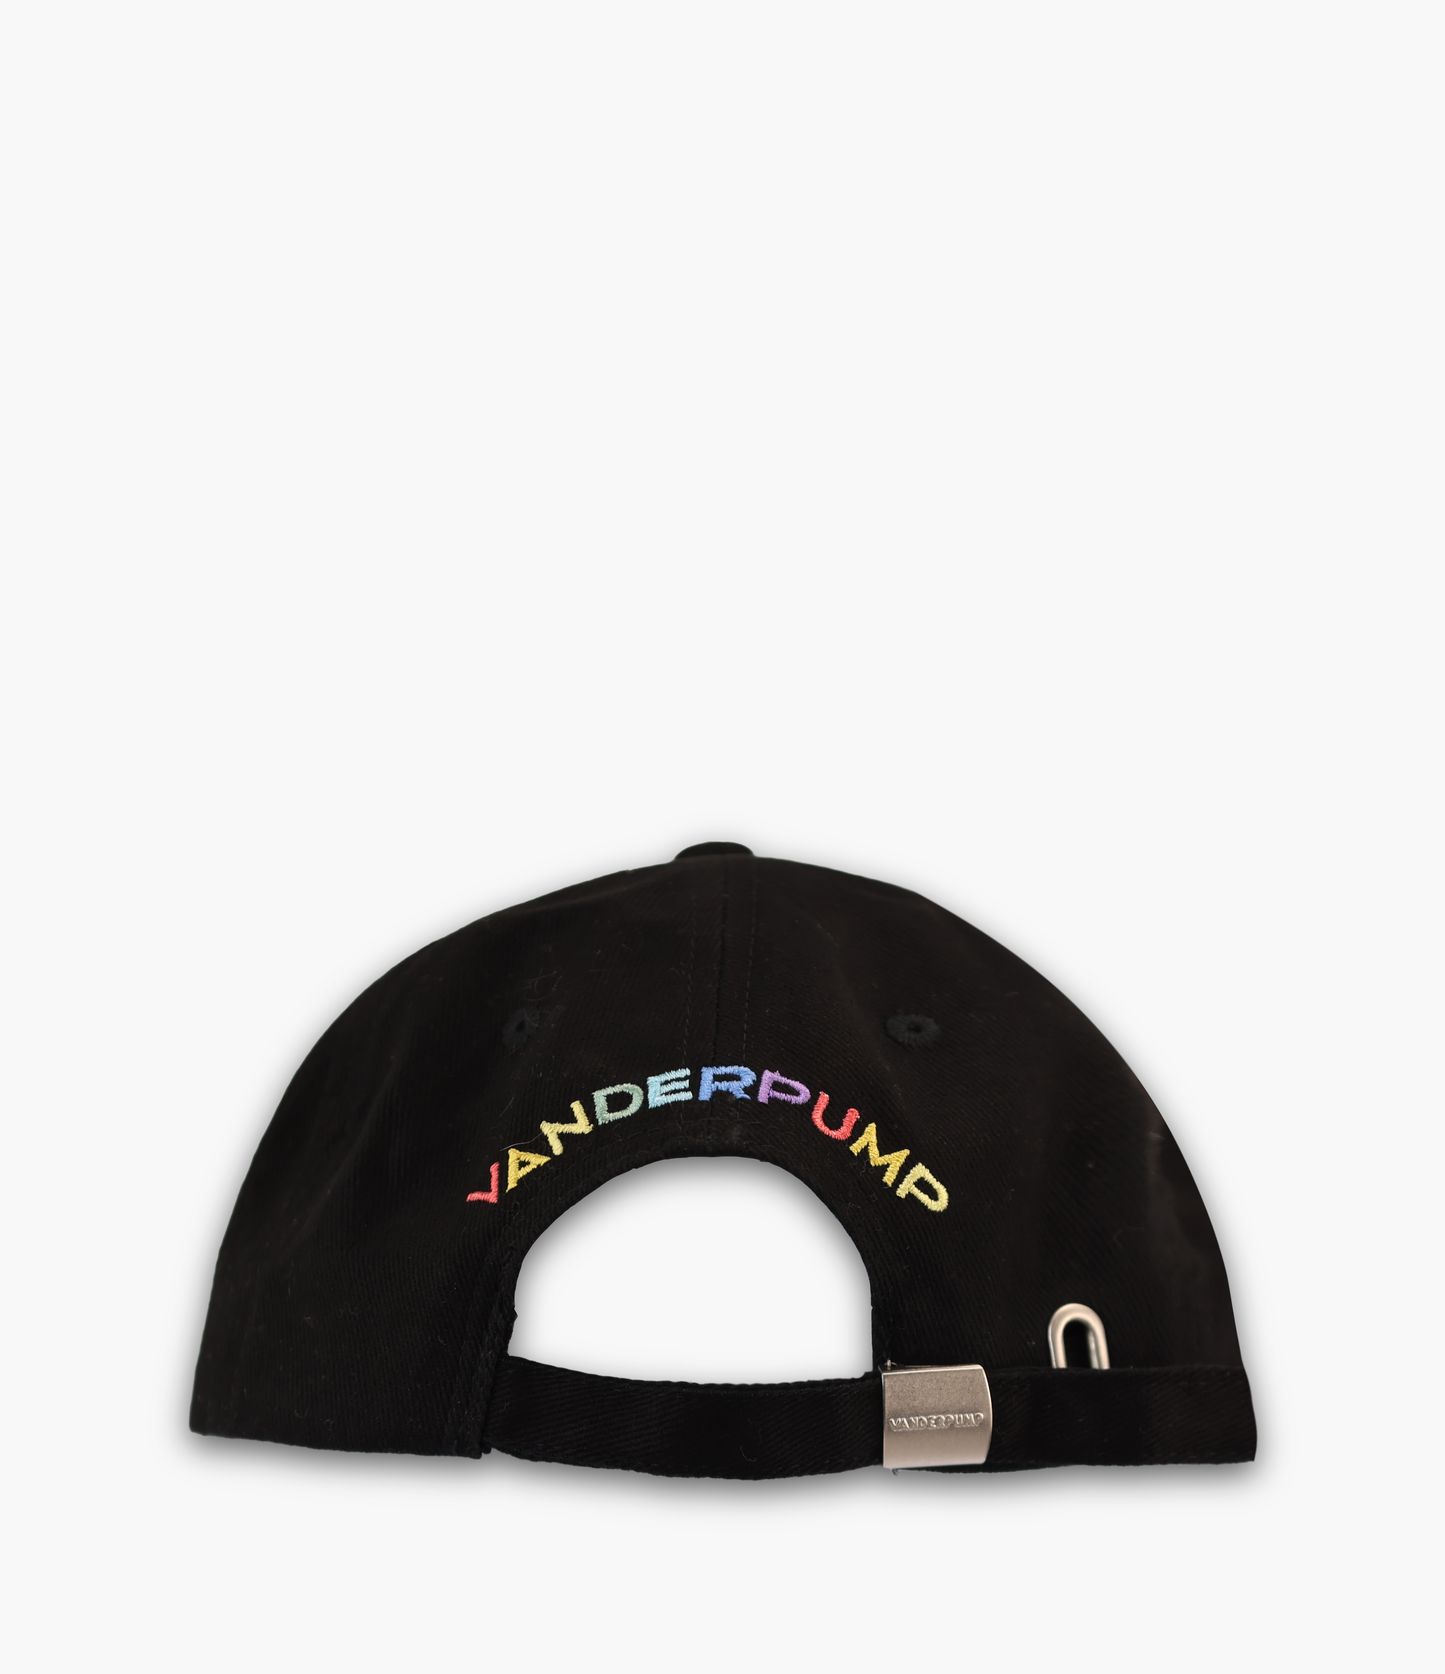 "Love is Love" Embroidered Hat